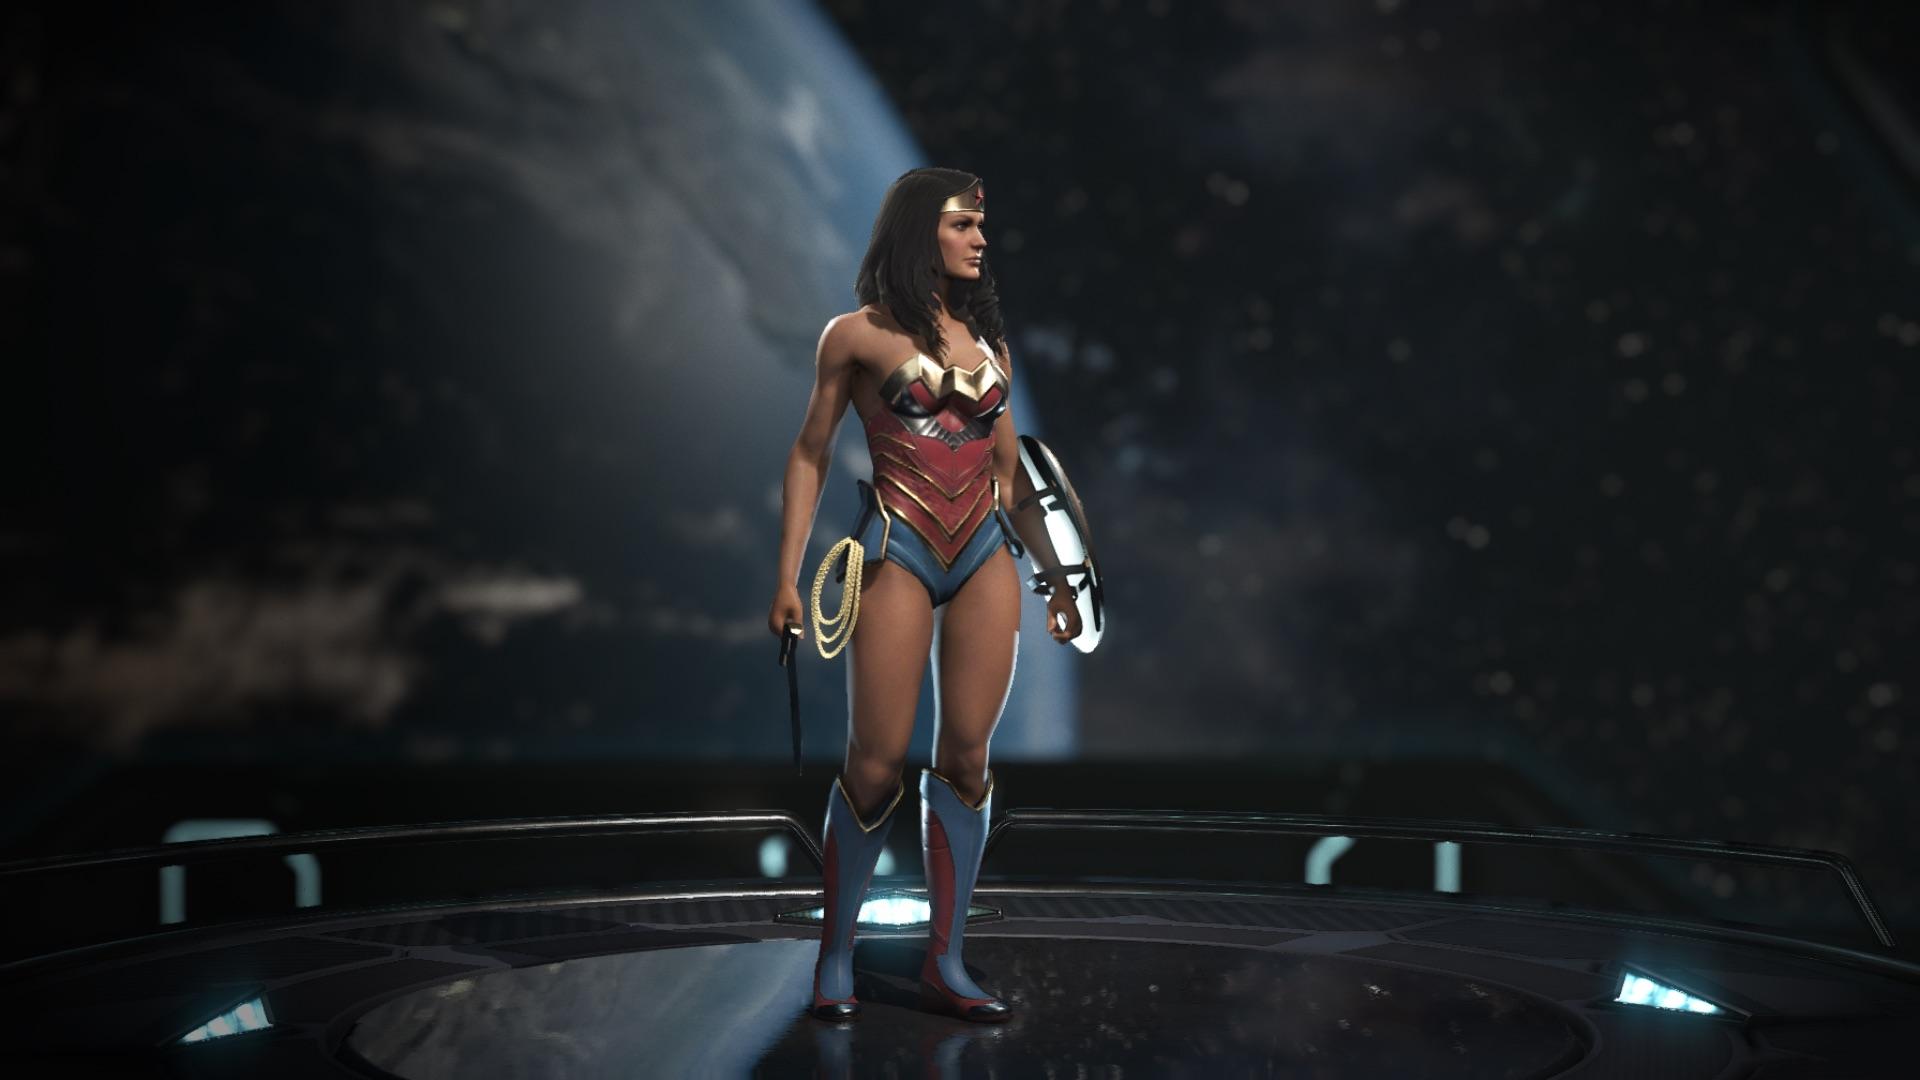 You can take off Wonder Woman's bracelets completely with the right gear